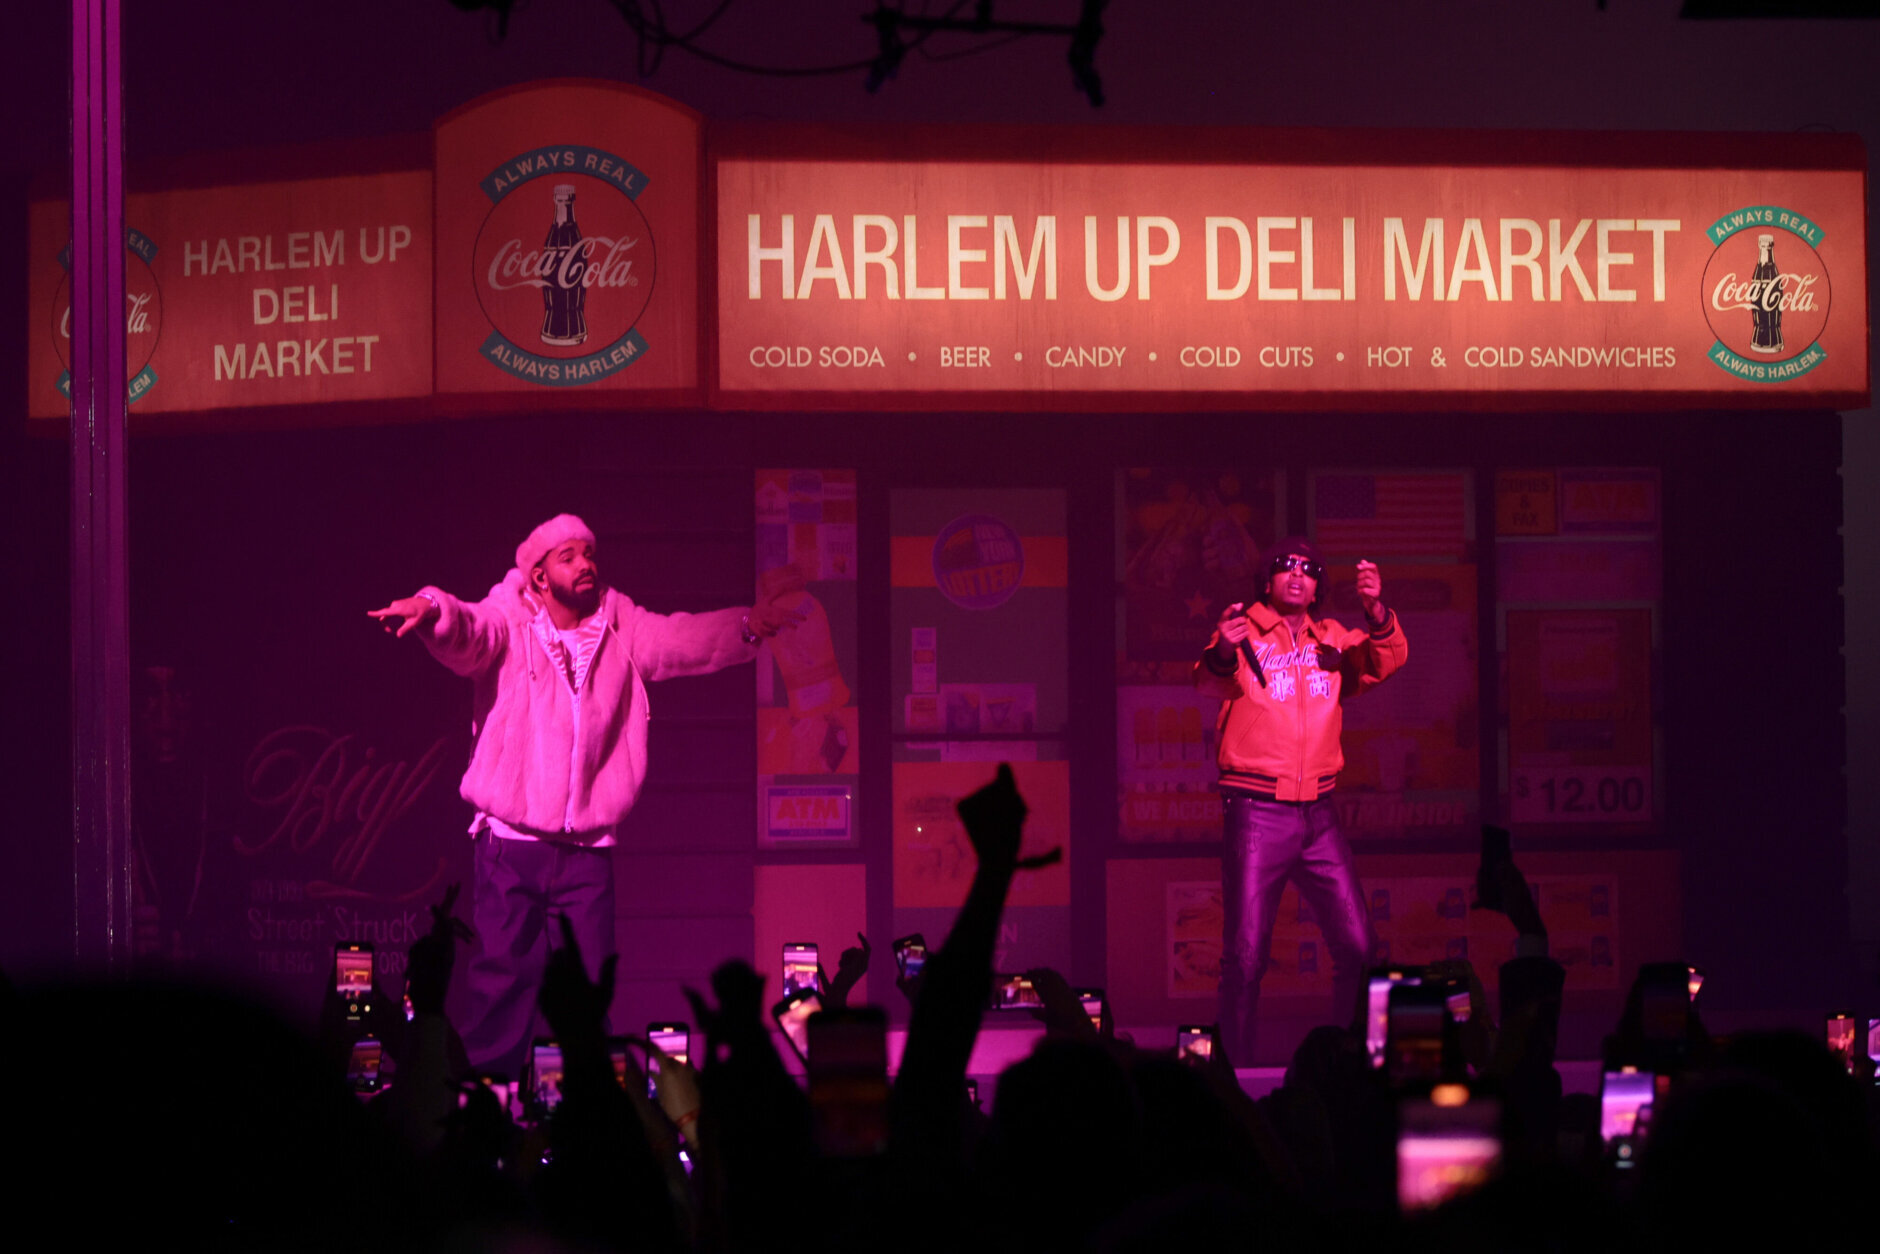 NEW YORK, NEW YORK - JANUARY 21: Drake and 21 Savage performs on stage at The Apollo Theater on January 21, 2023 in New York City. 